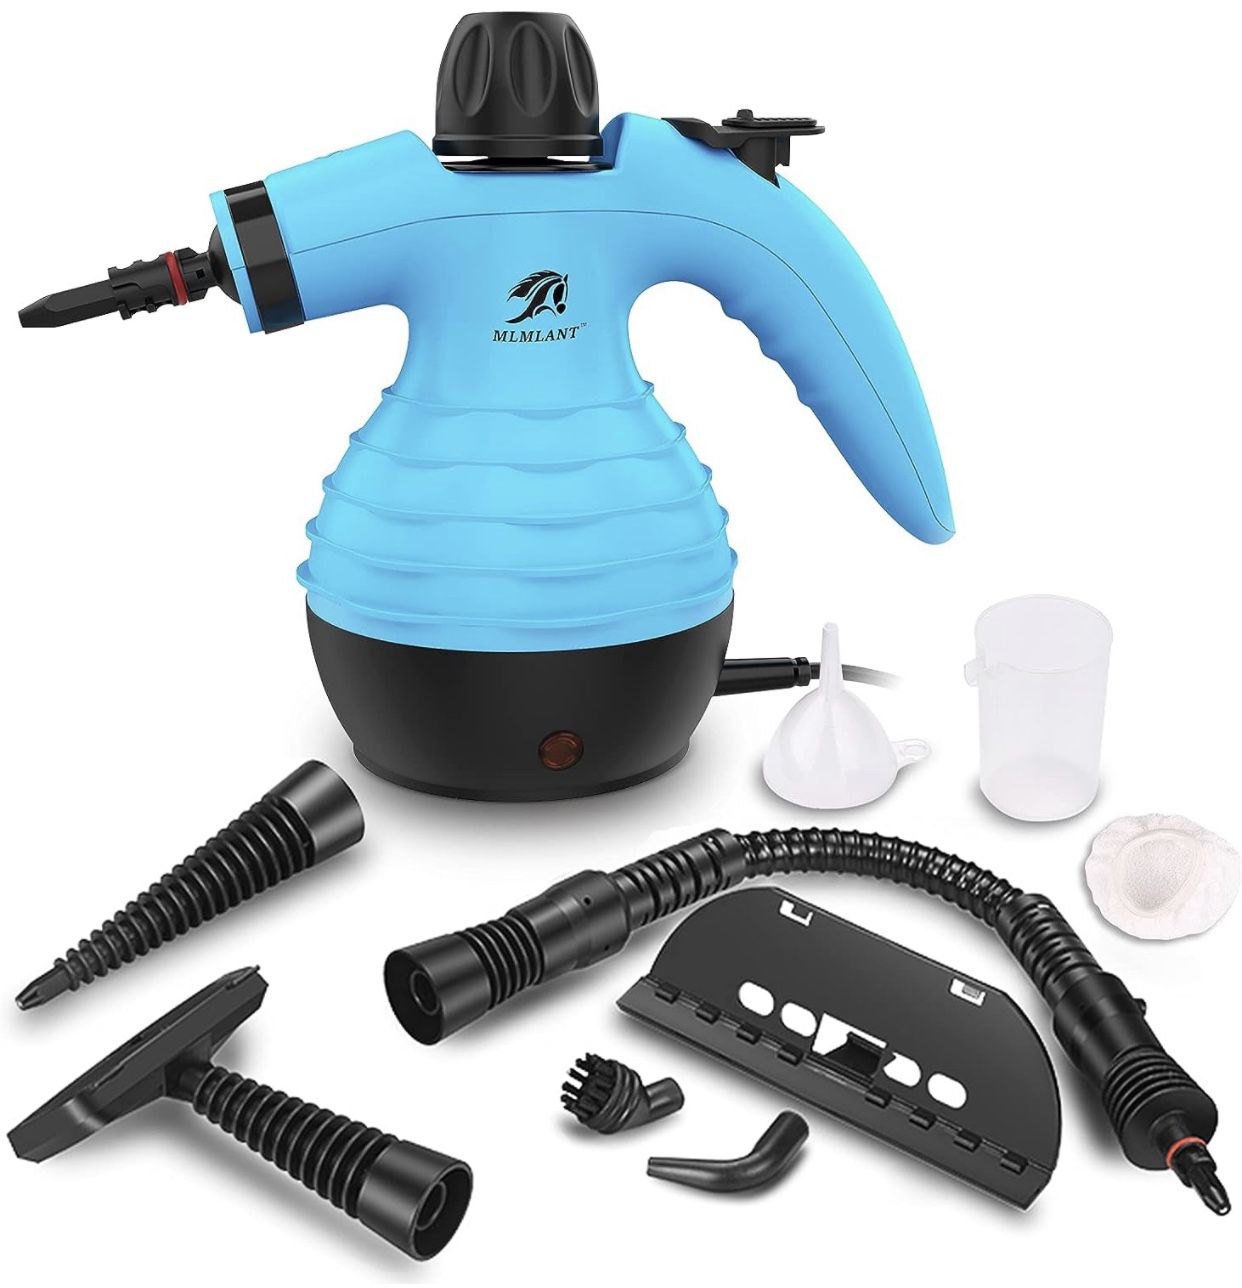 Handheld Steam Cleaner, Multipurpose Portable Upholstery Steamer with Safety Lock and 9 Accessory Kit for Carpet, Couch, Clothes, Mattress, Car Seats,